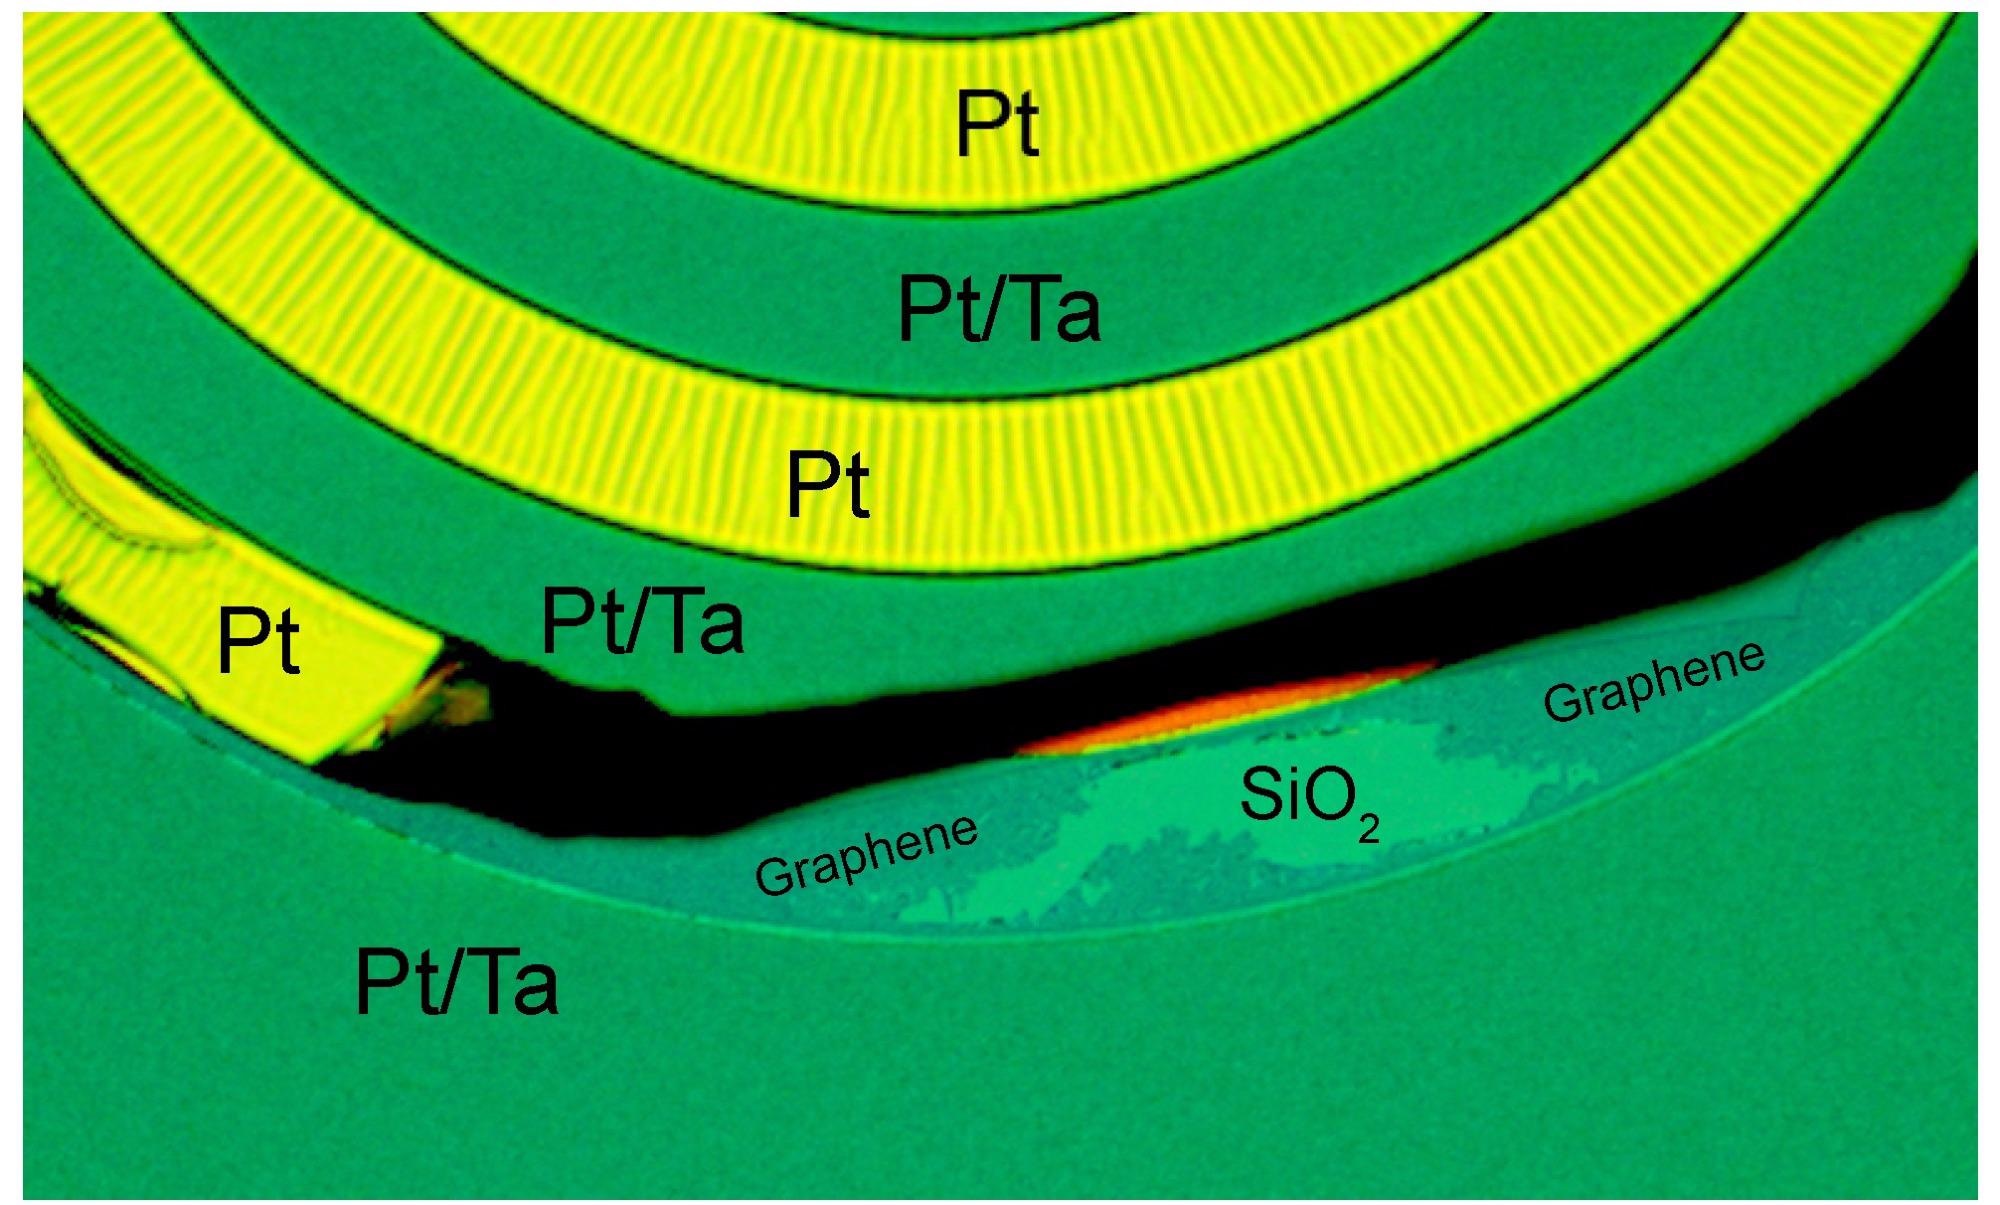 Optical micrograph of a wafer with lift-off patterned Ta structures, after the CVD graphene growth and before the Pt etch process step. Whereas the 50 nm Pt on top of 30 nm Ta is forming a flat surface, with Ta enhancing Pt adhesion, the intermediate regions with Pt show signs of weak adhesion (surface corrugation) and delamination. In a region where the Pt is delaminated, CVD graphene is observed on the SiO2, that corresponds to the graphene in Figure 4 after Pt etch.